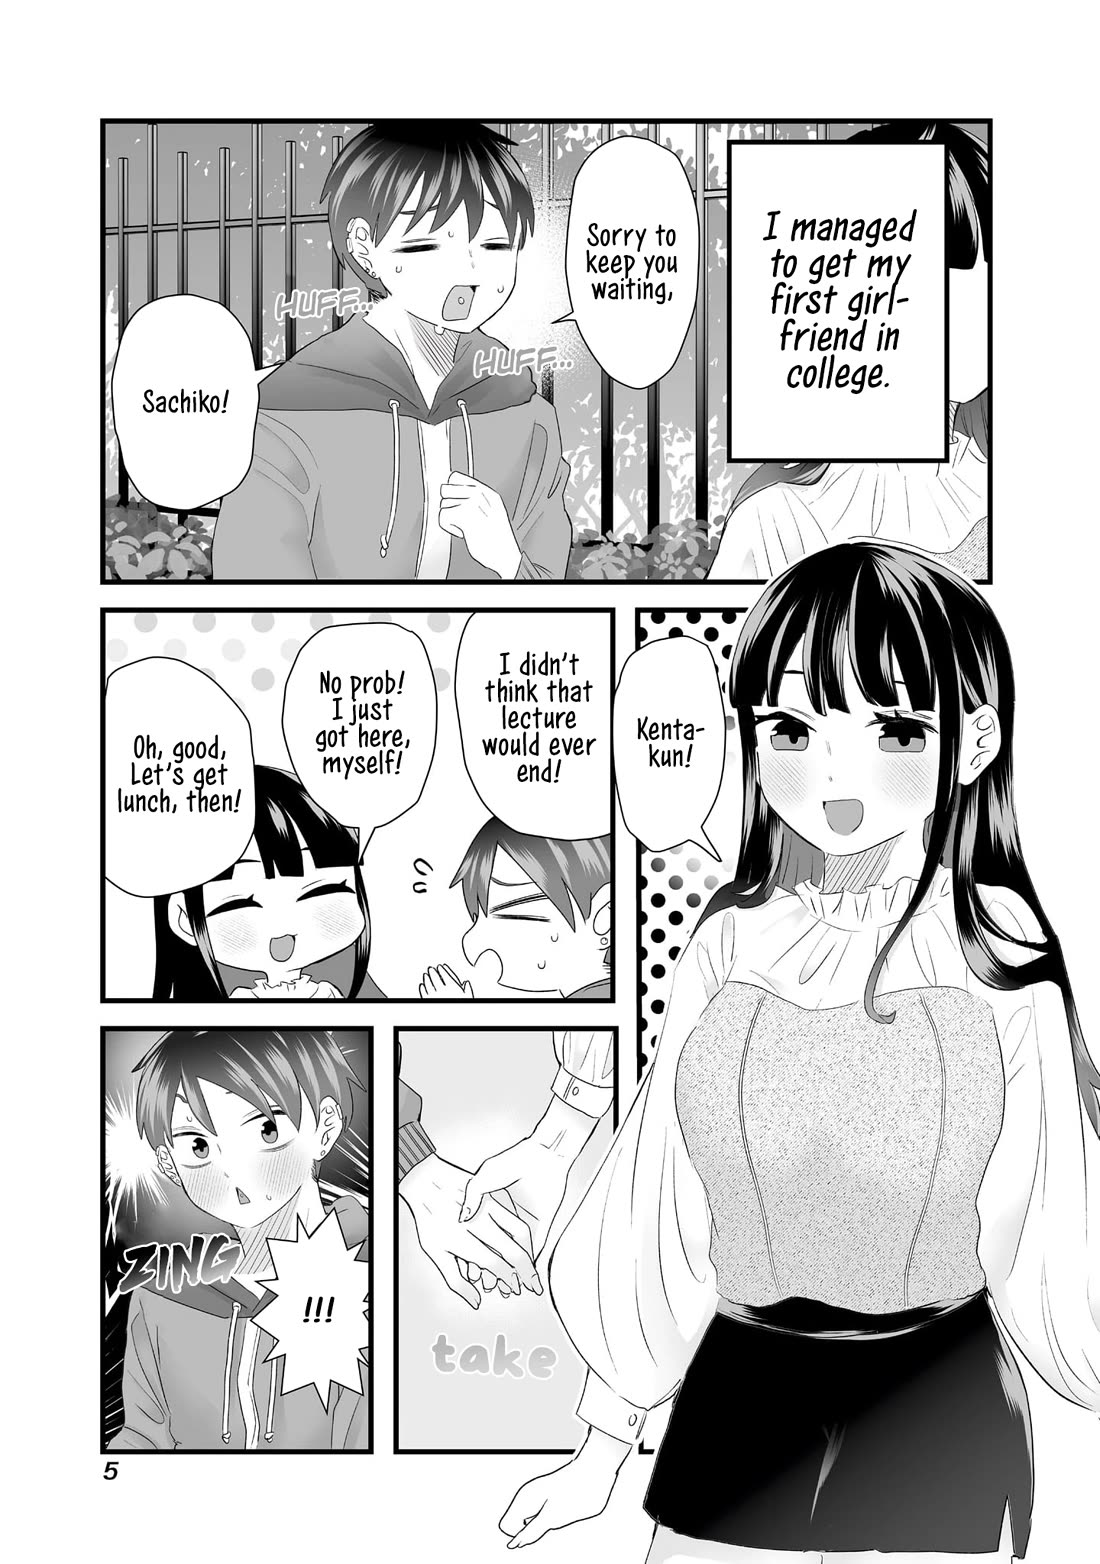 Sacchan and Ken-chan Are Going at it Again - chapter 1 - #6